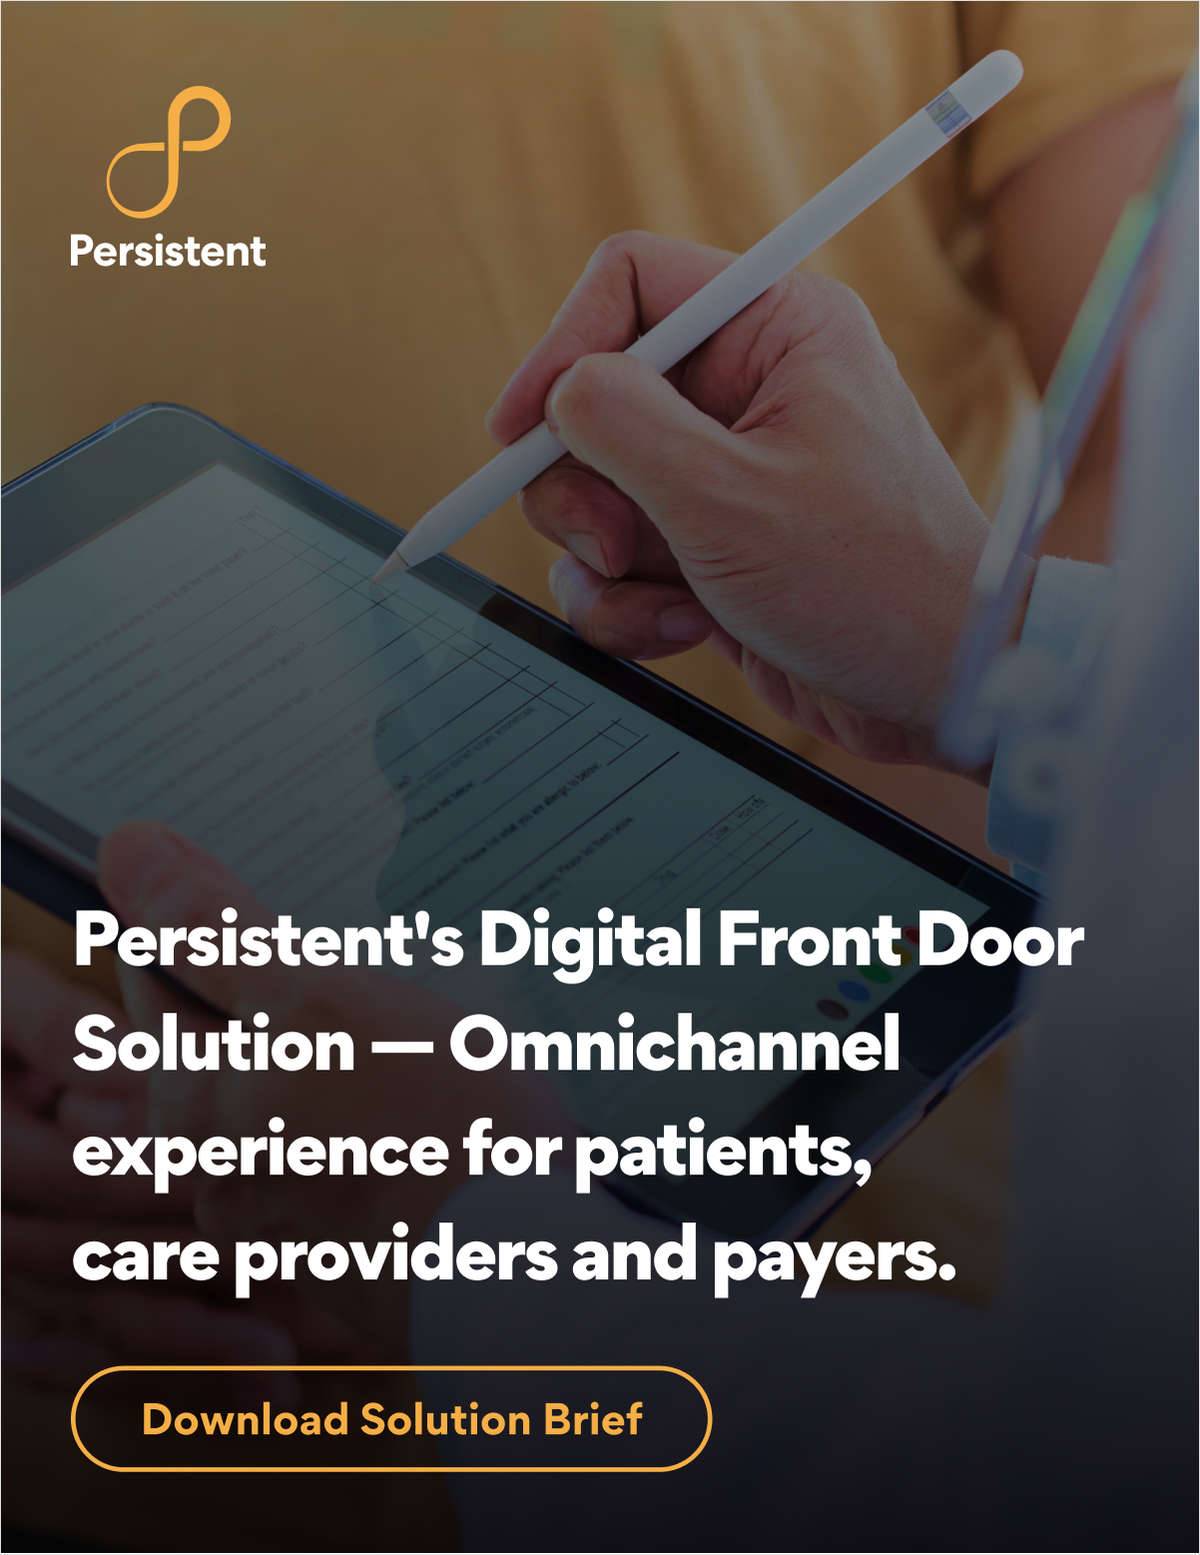 Engage patients quickly and delivering care anywhere with Digital Front Door (DFD) solutions